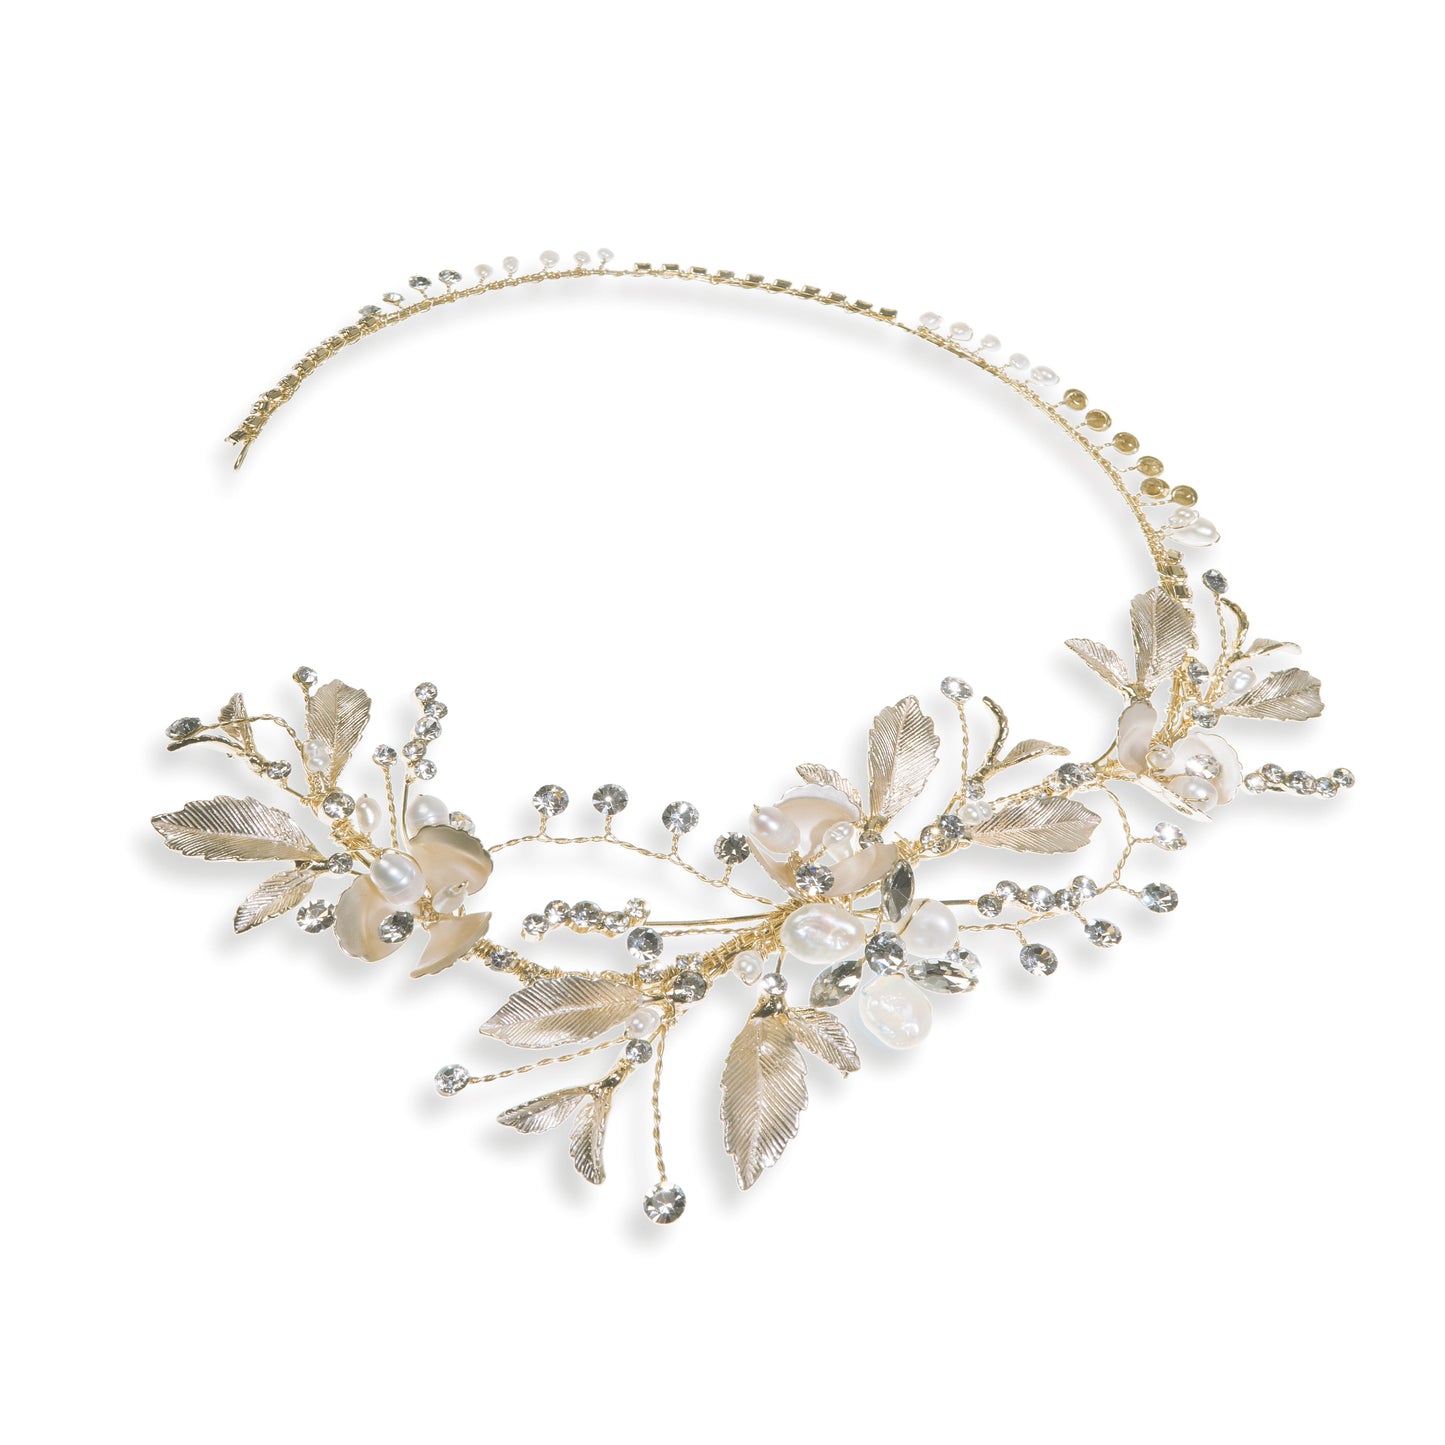 Vivian - Gold Crystal and Pearl Enamelled Leafy Hair Vine